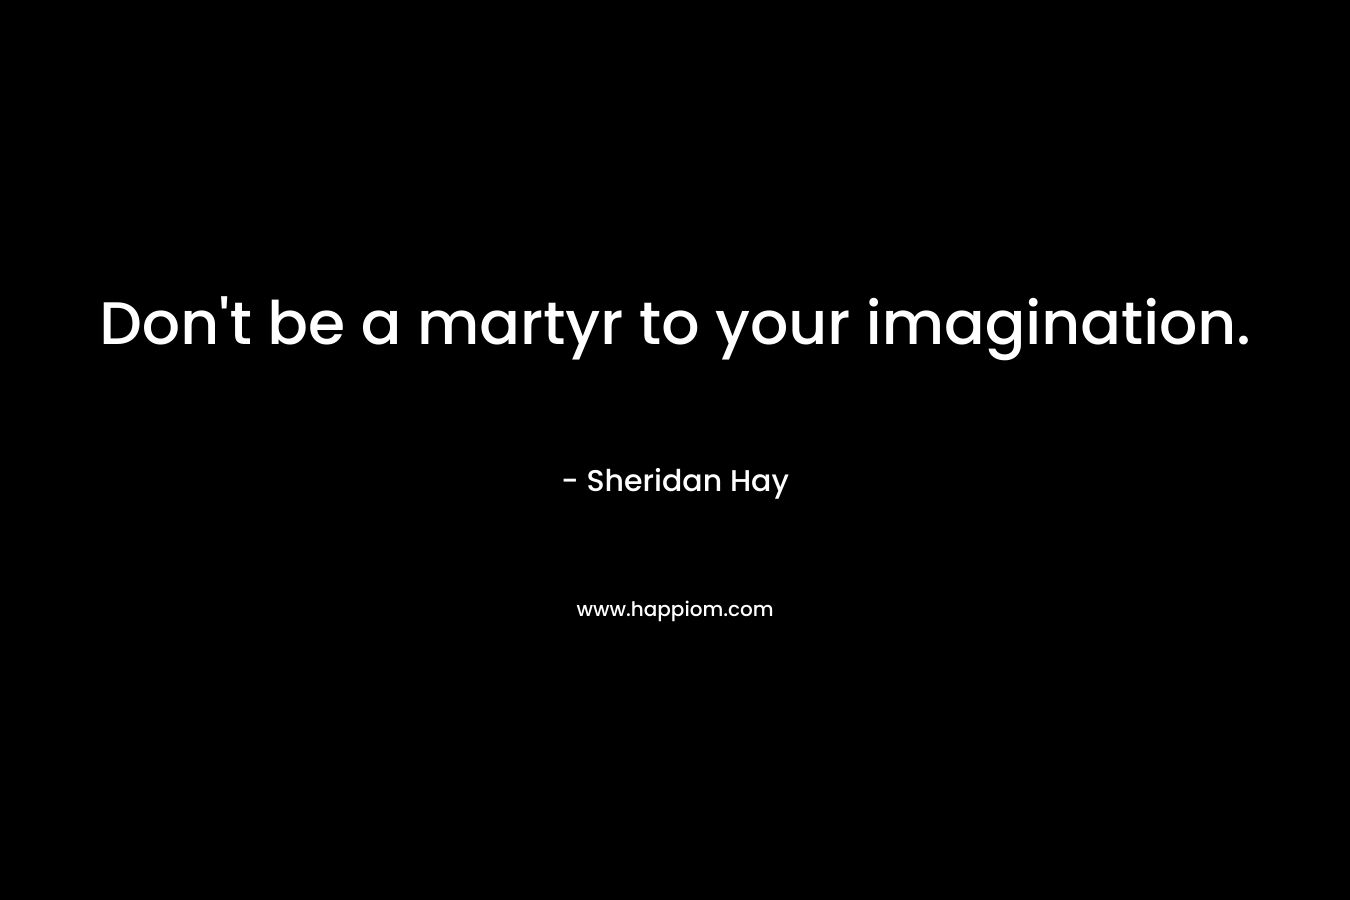 Don’t be a martyr to your imagination. – Sheridan Hay